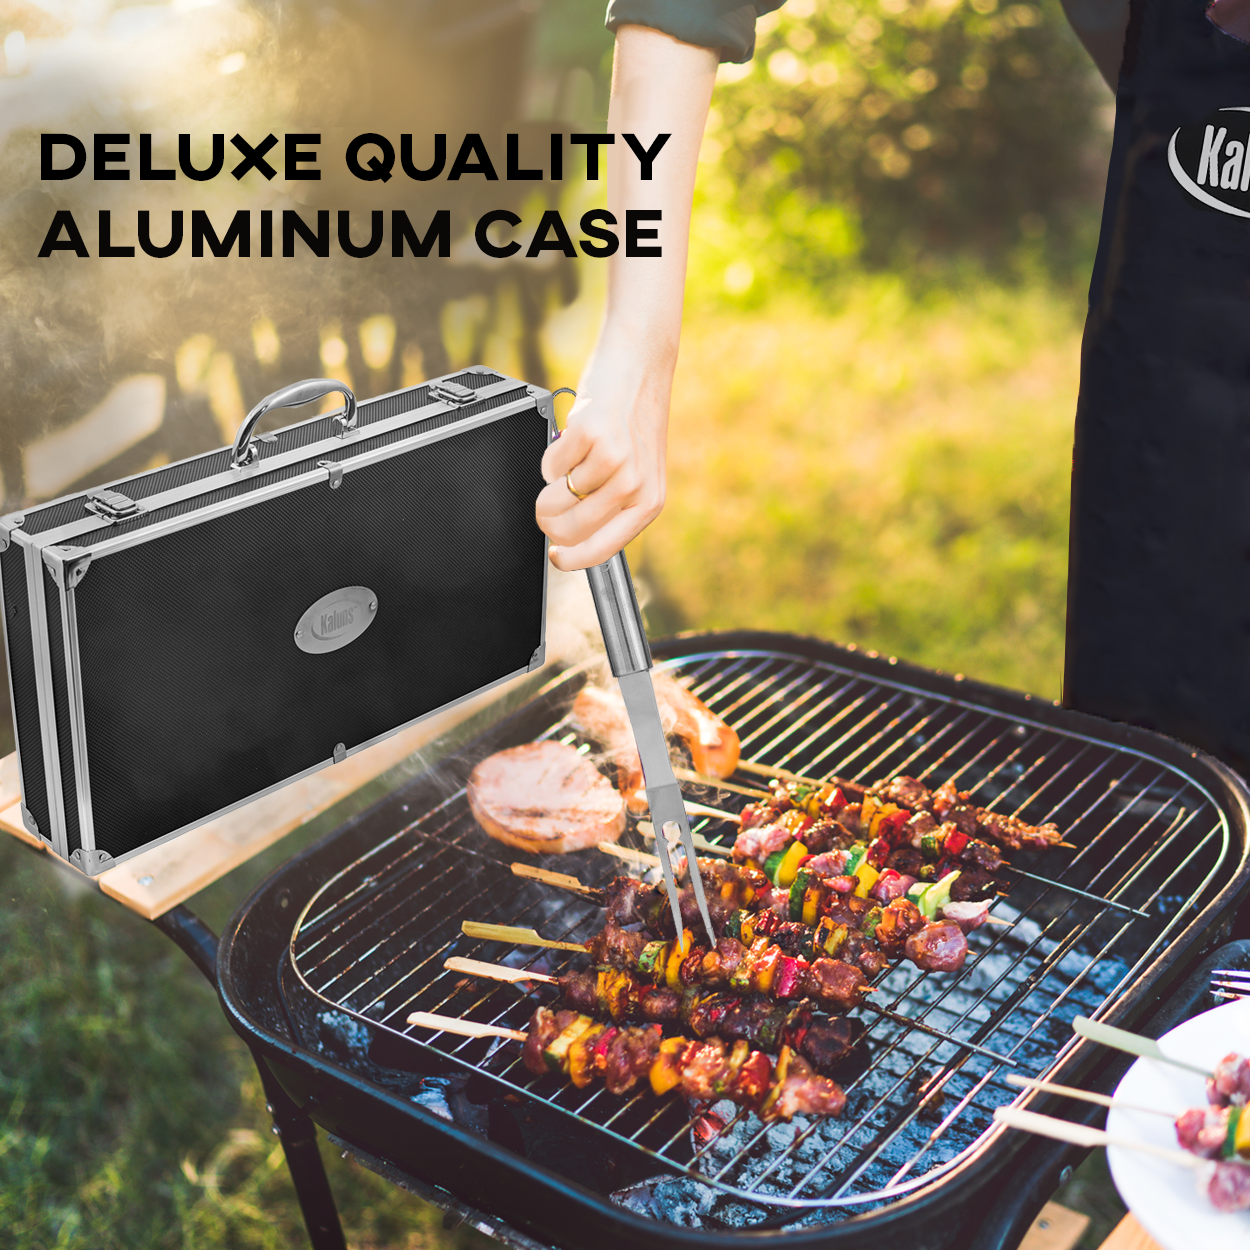 Kaluns BBQ Grilling Accessories, Grilling Gifts for Men Dad, Grill Tools  for Outdoor Grill, Heavy Duty Stainless Steel Grill Set with Aluminum Case